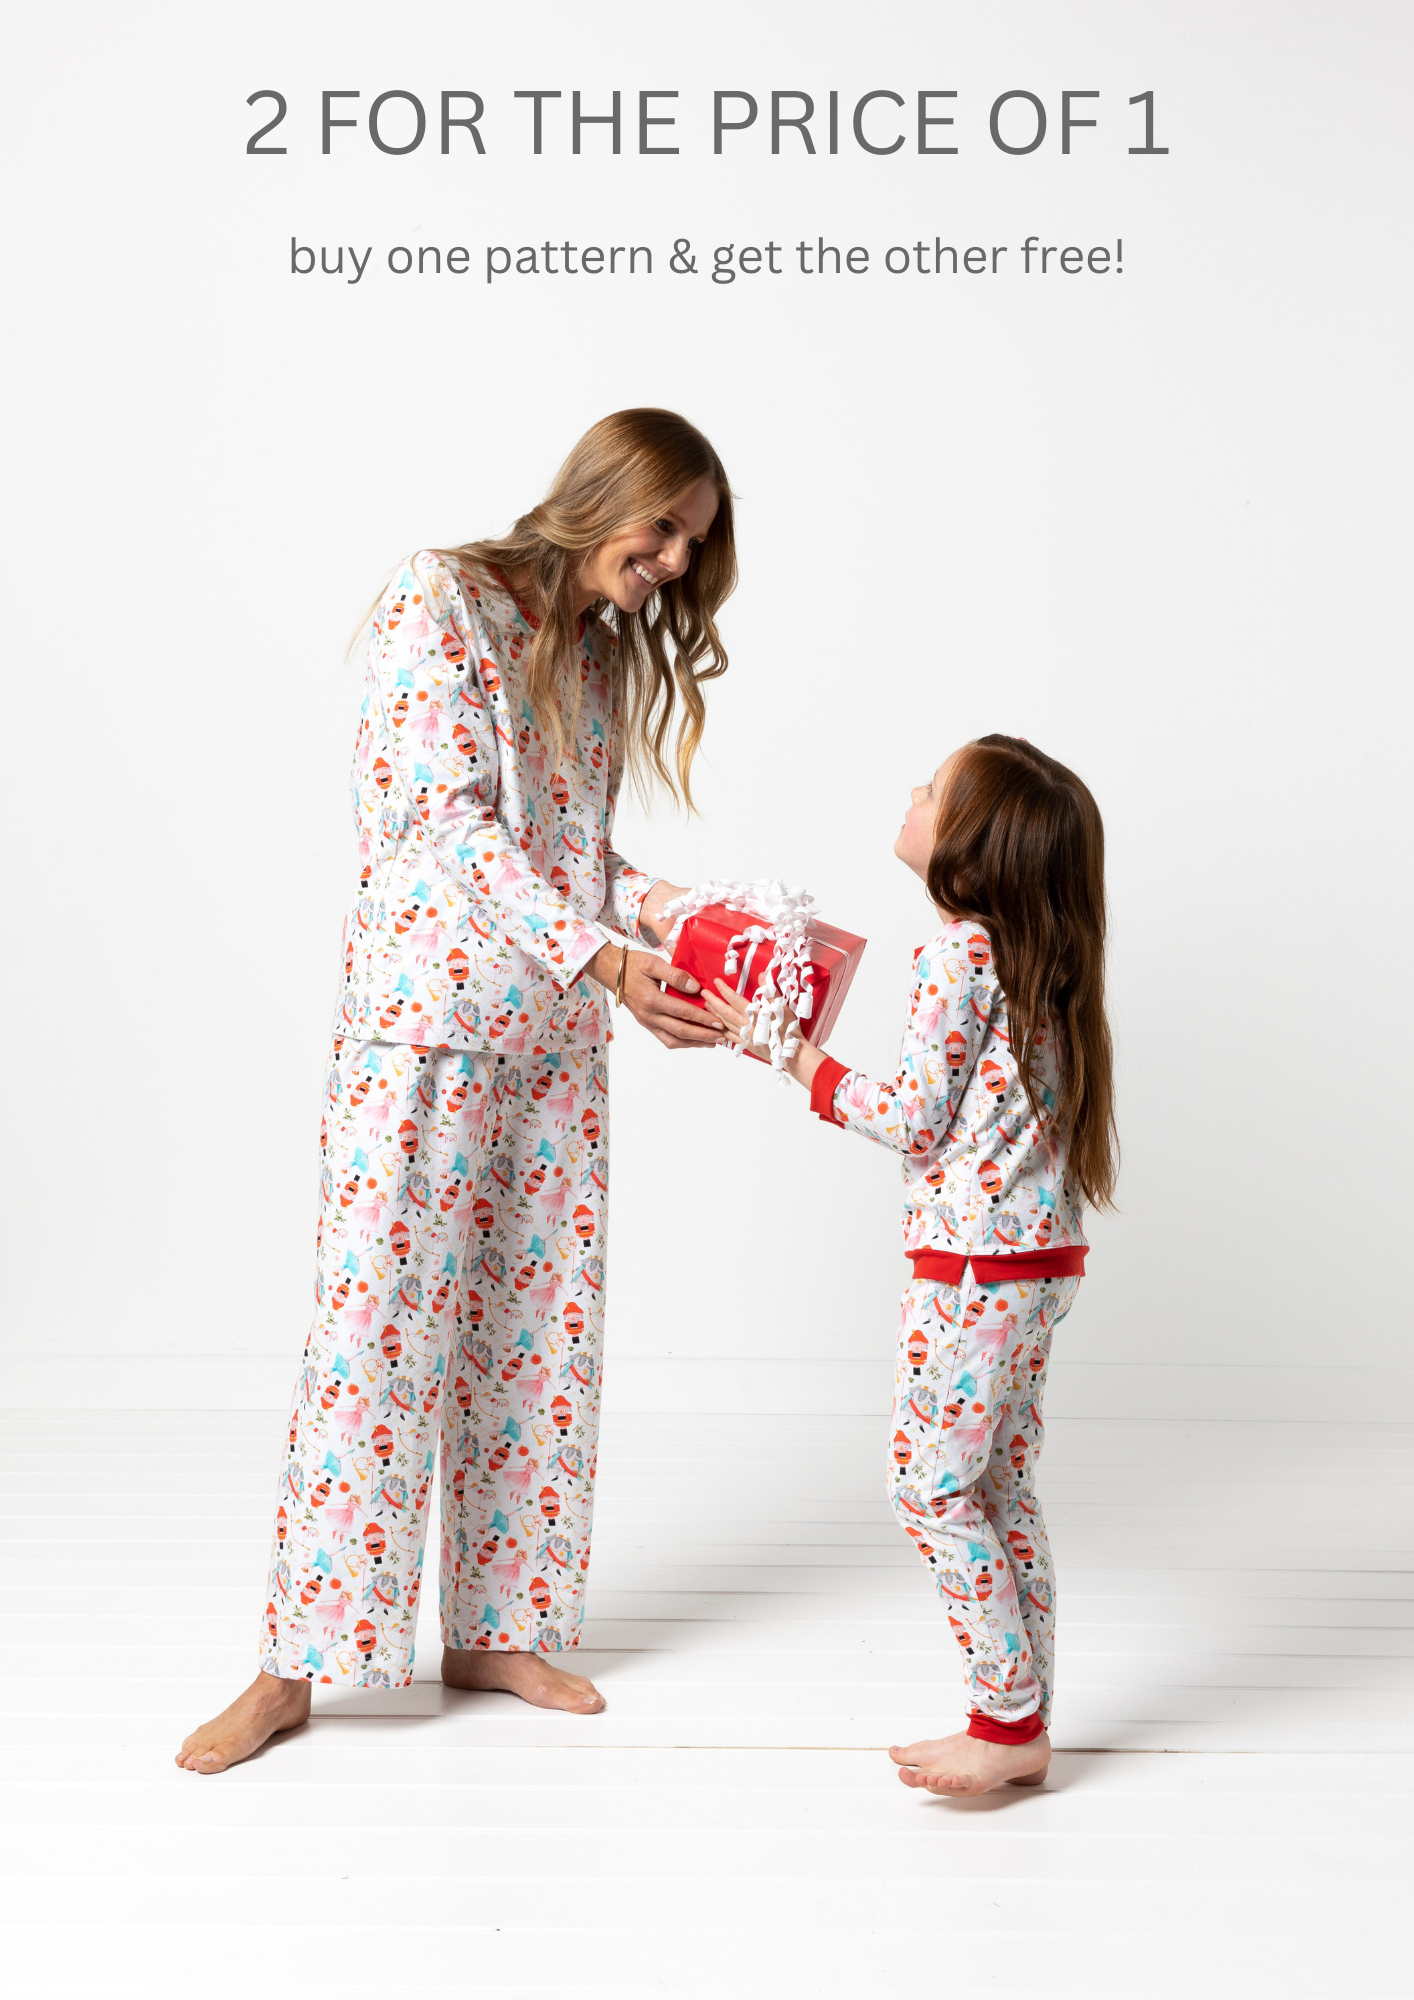 Buy the the Women's Knit Pjs and get the Children's PJ Set PDF pattern for FREE!